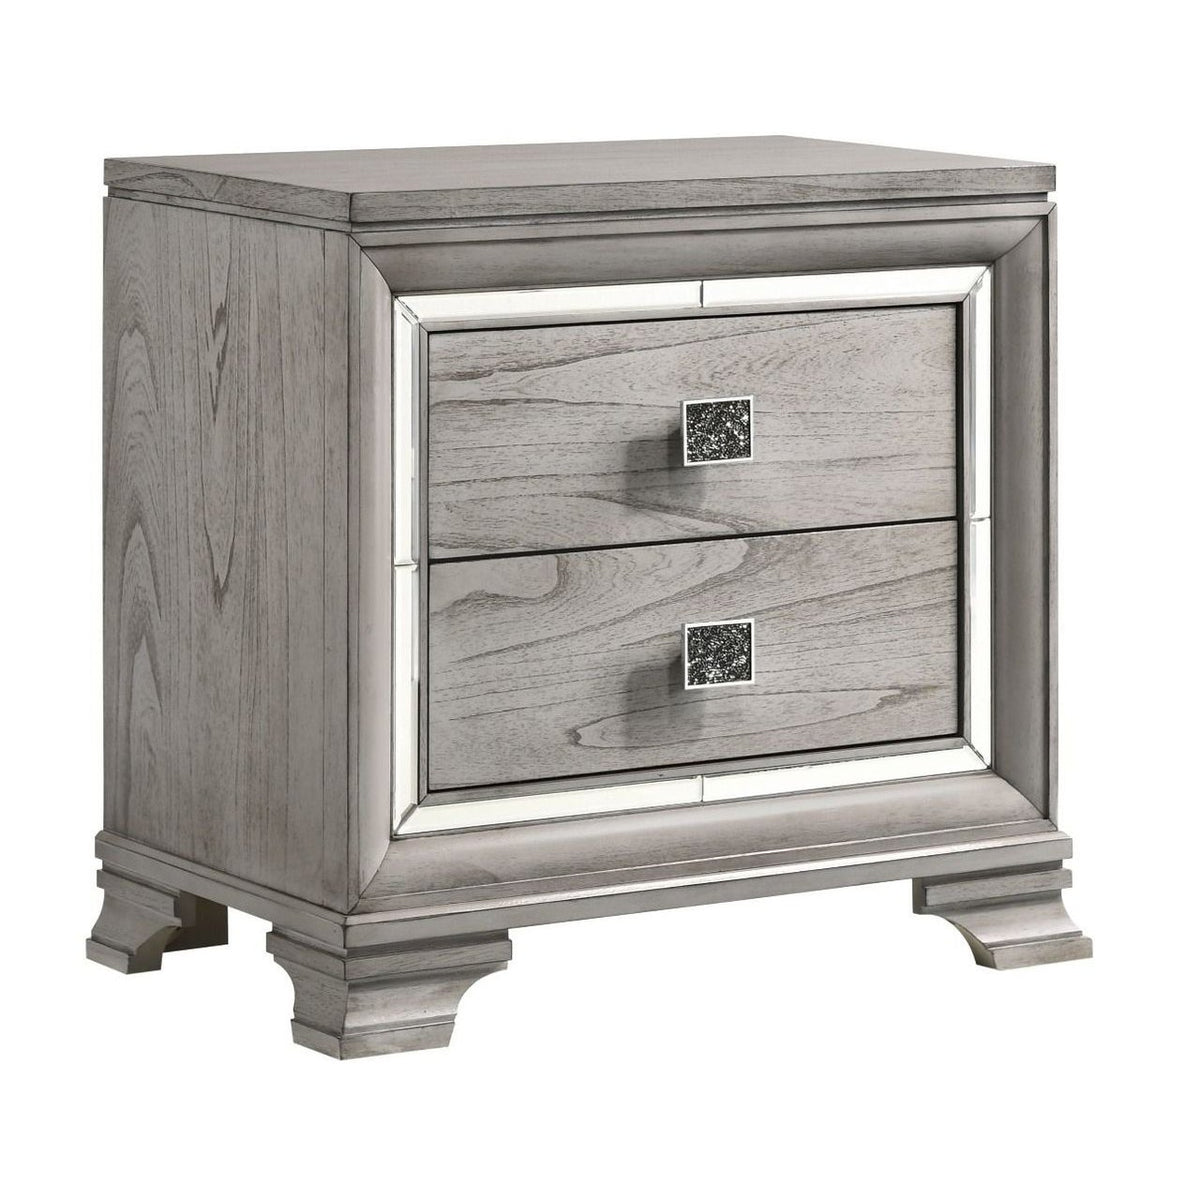 2 Drawer Nightstand with Mirror Accent and Bracket Feet, Light Gray - BM215293